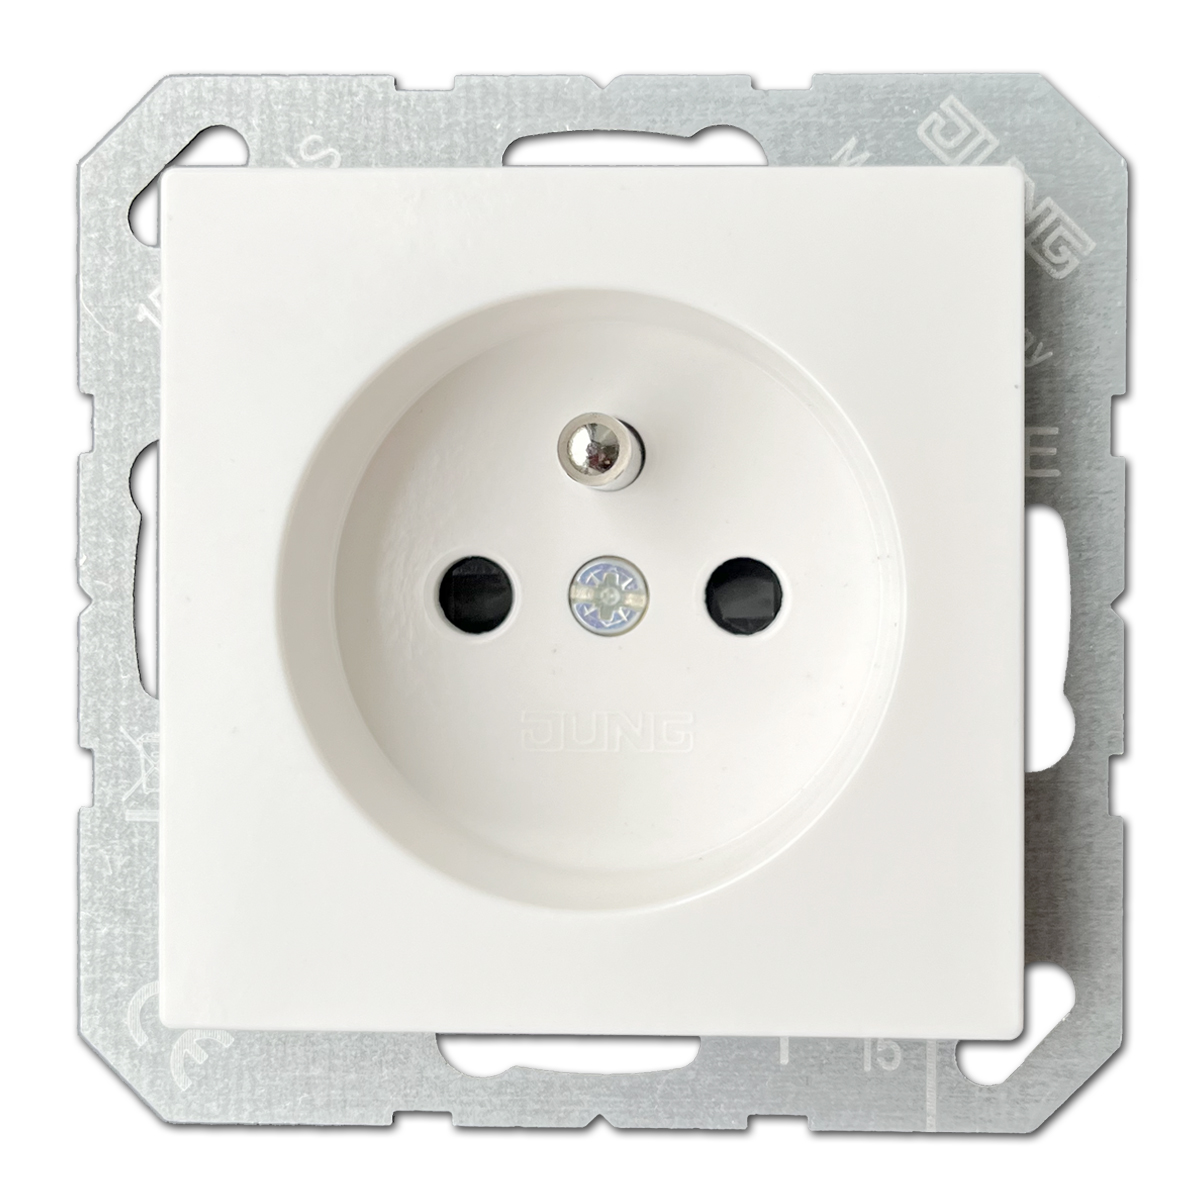 JUNG socket outlet insert. FRENCH standard. JUNG A 1520 FKI WW. Alpine white.